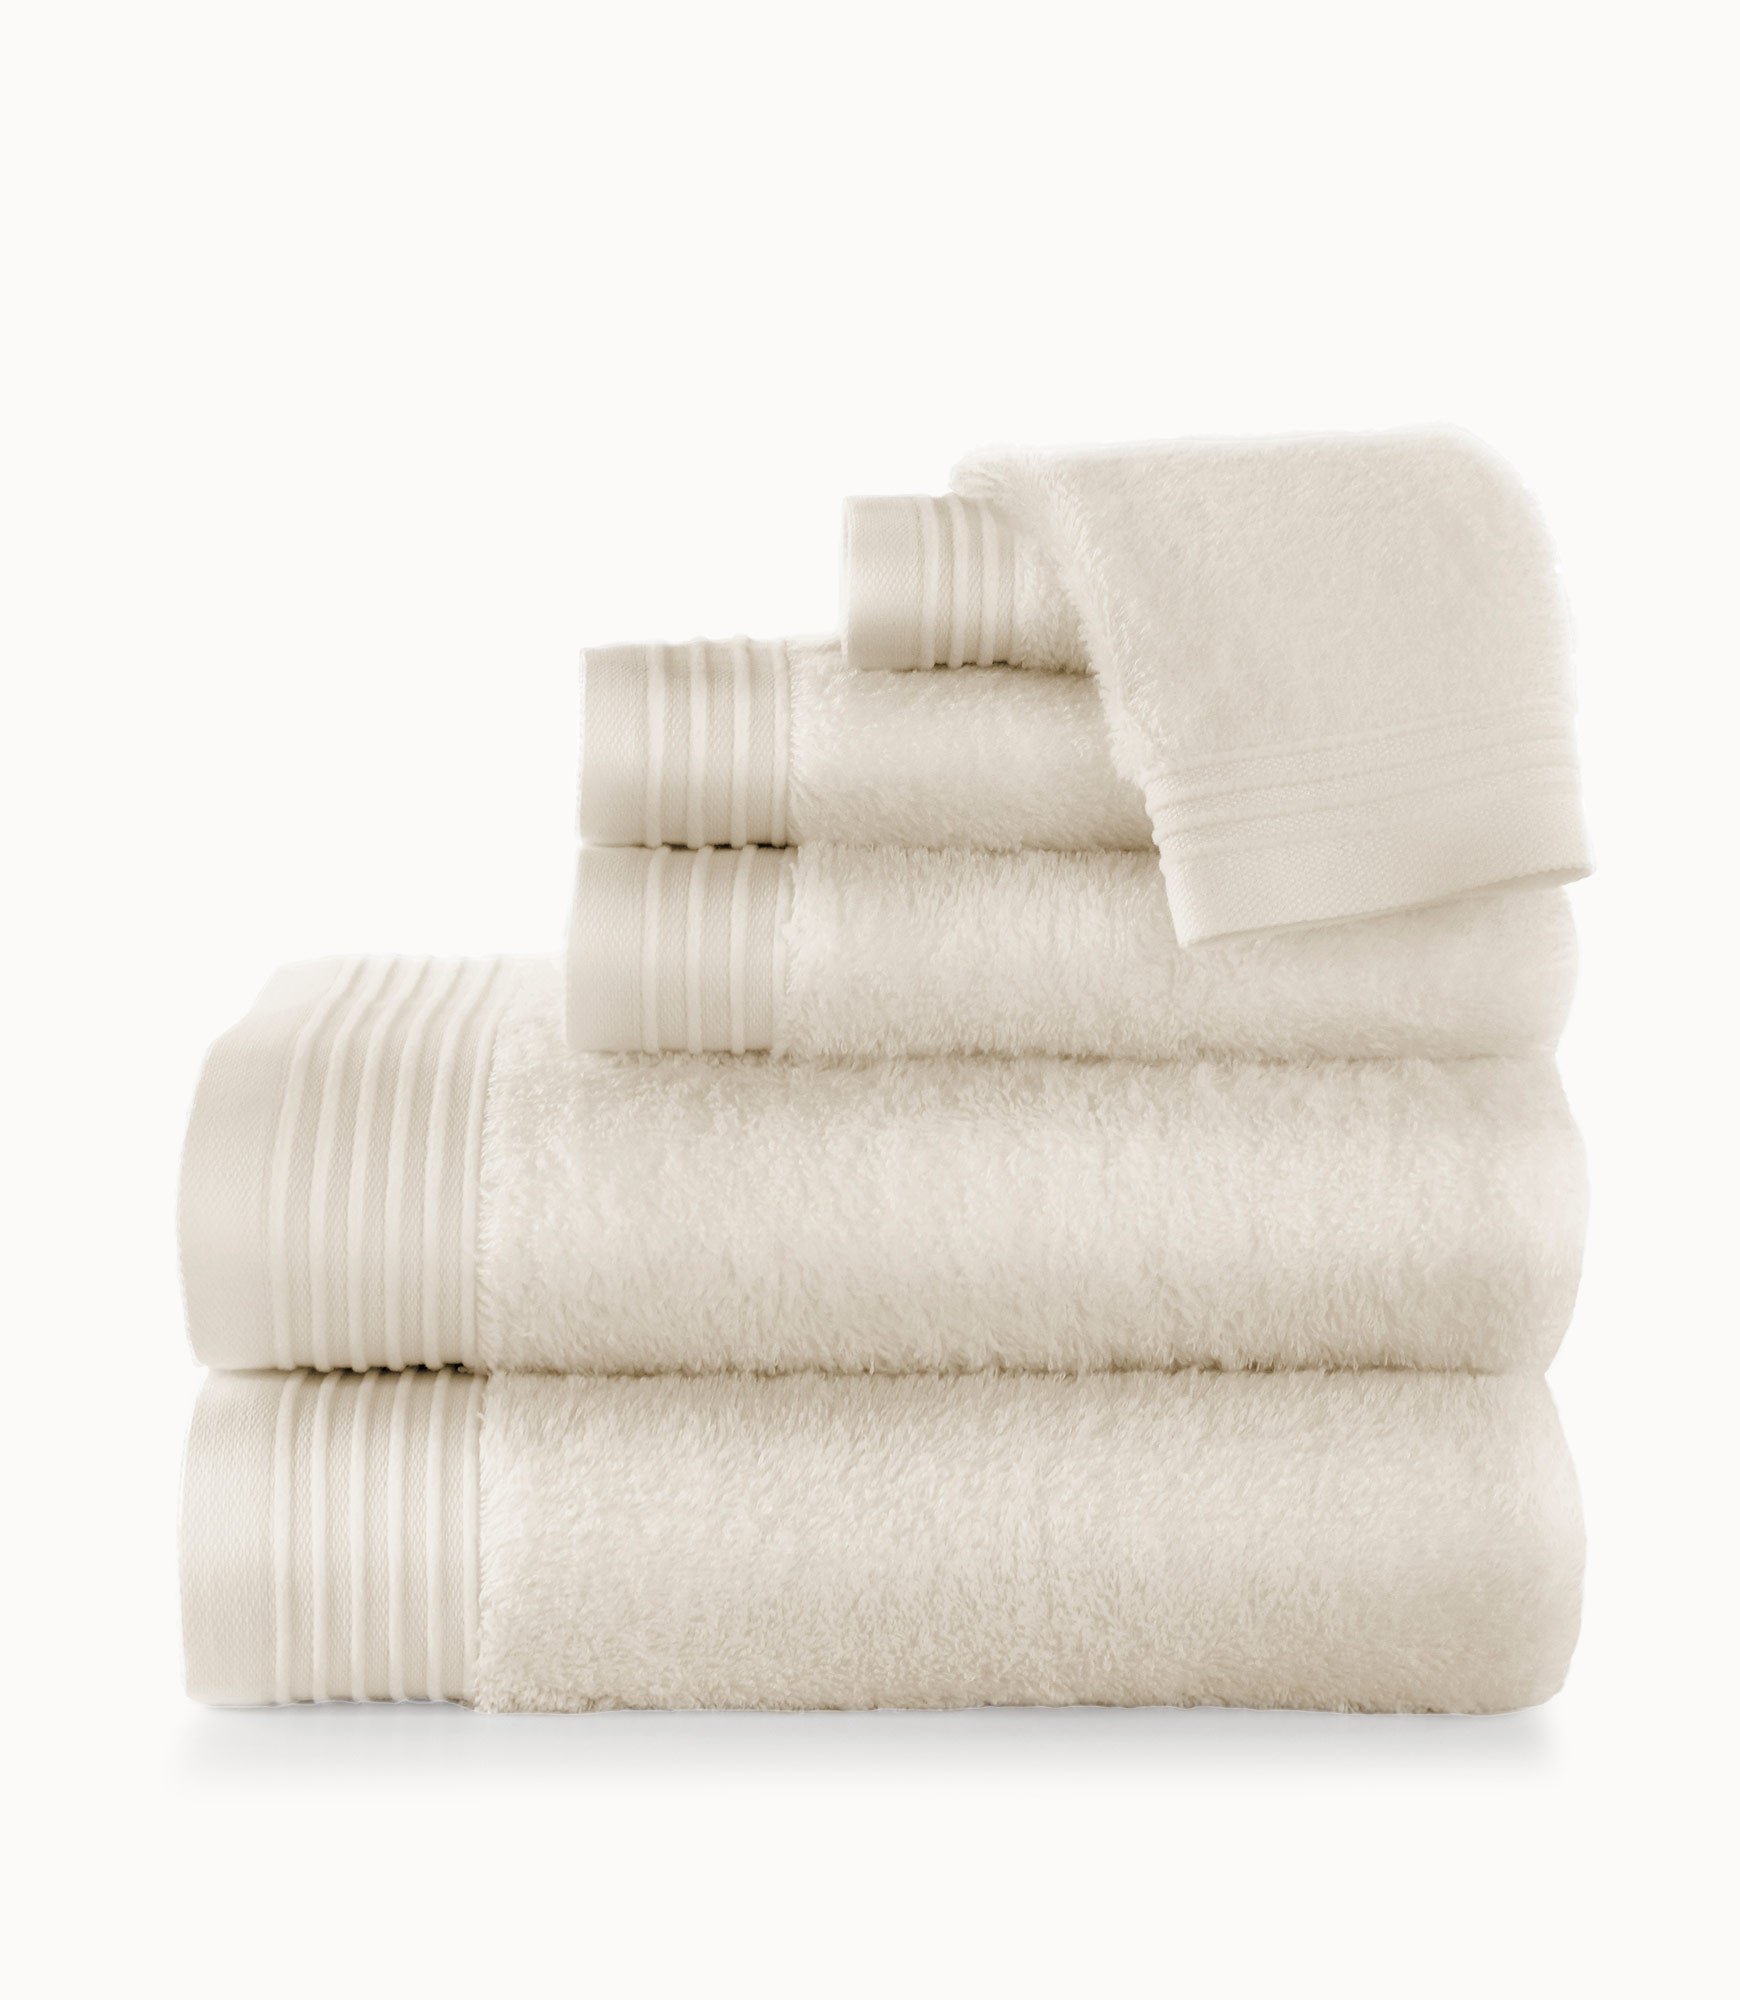 Bamboo Collection Luxury Bath Towel Set In Bronze Copper - Bath